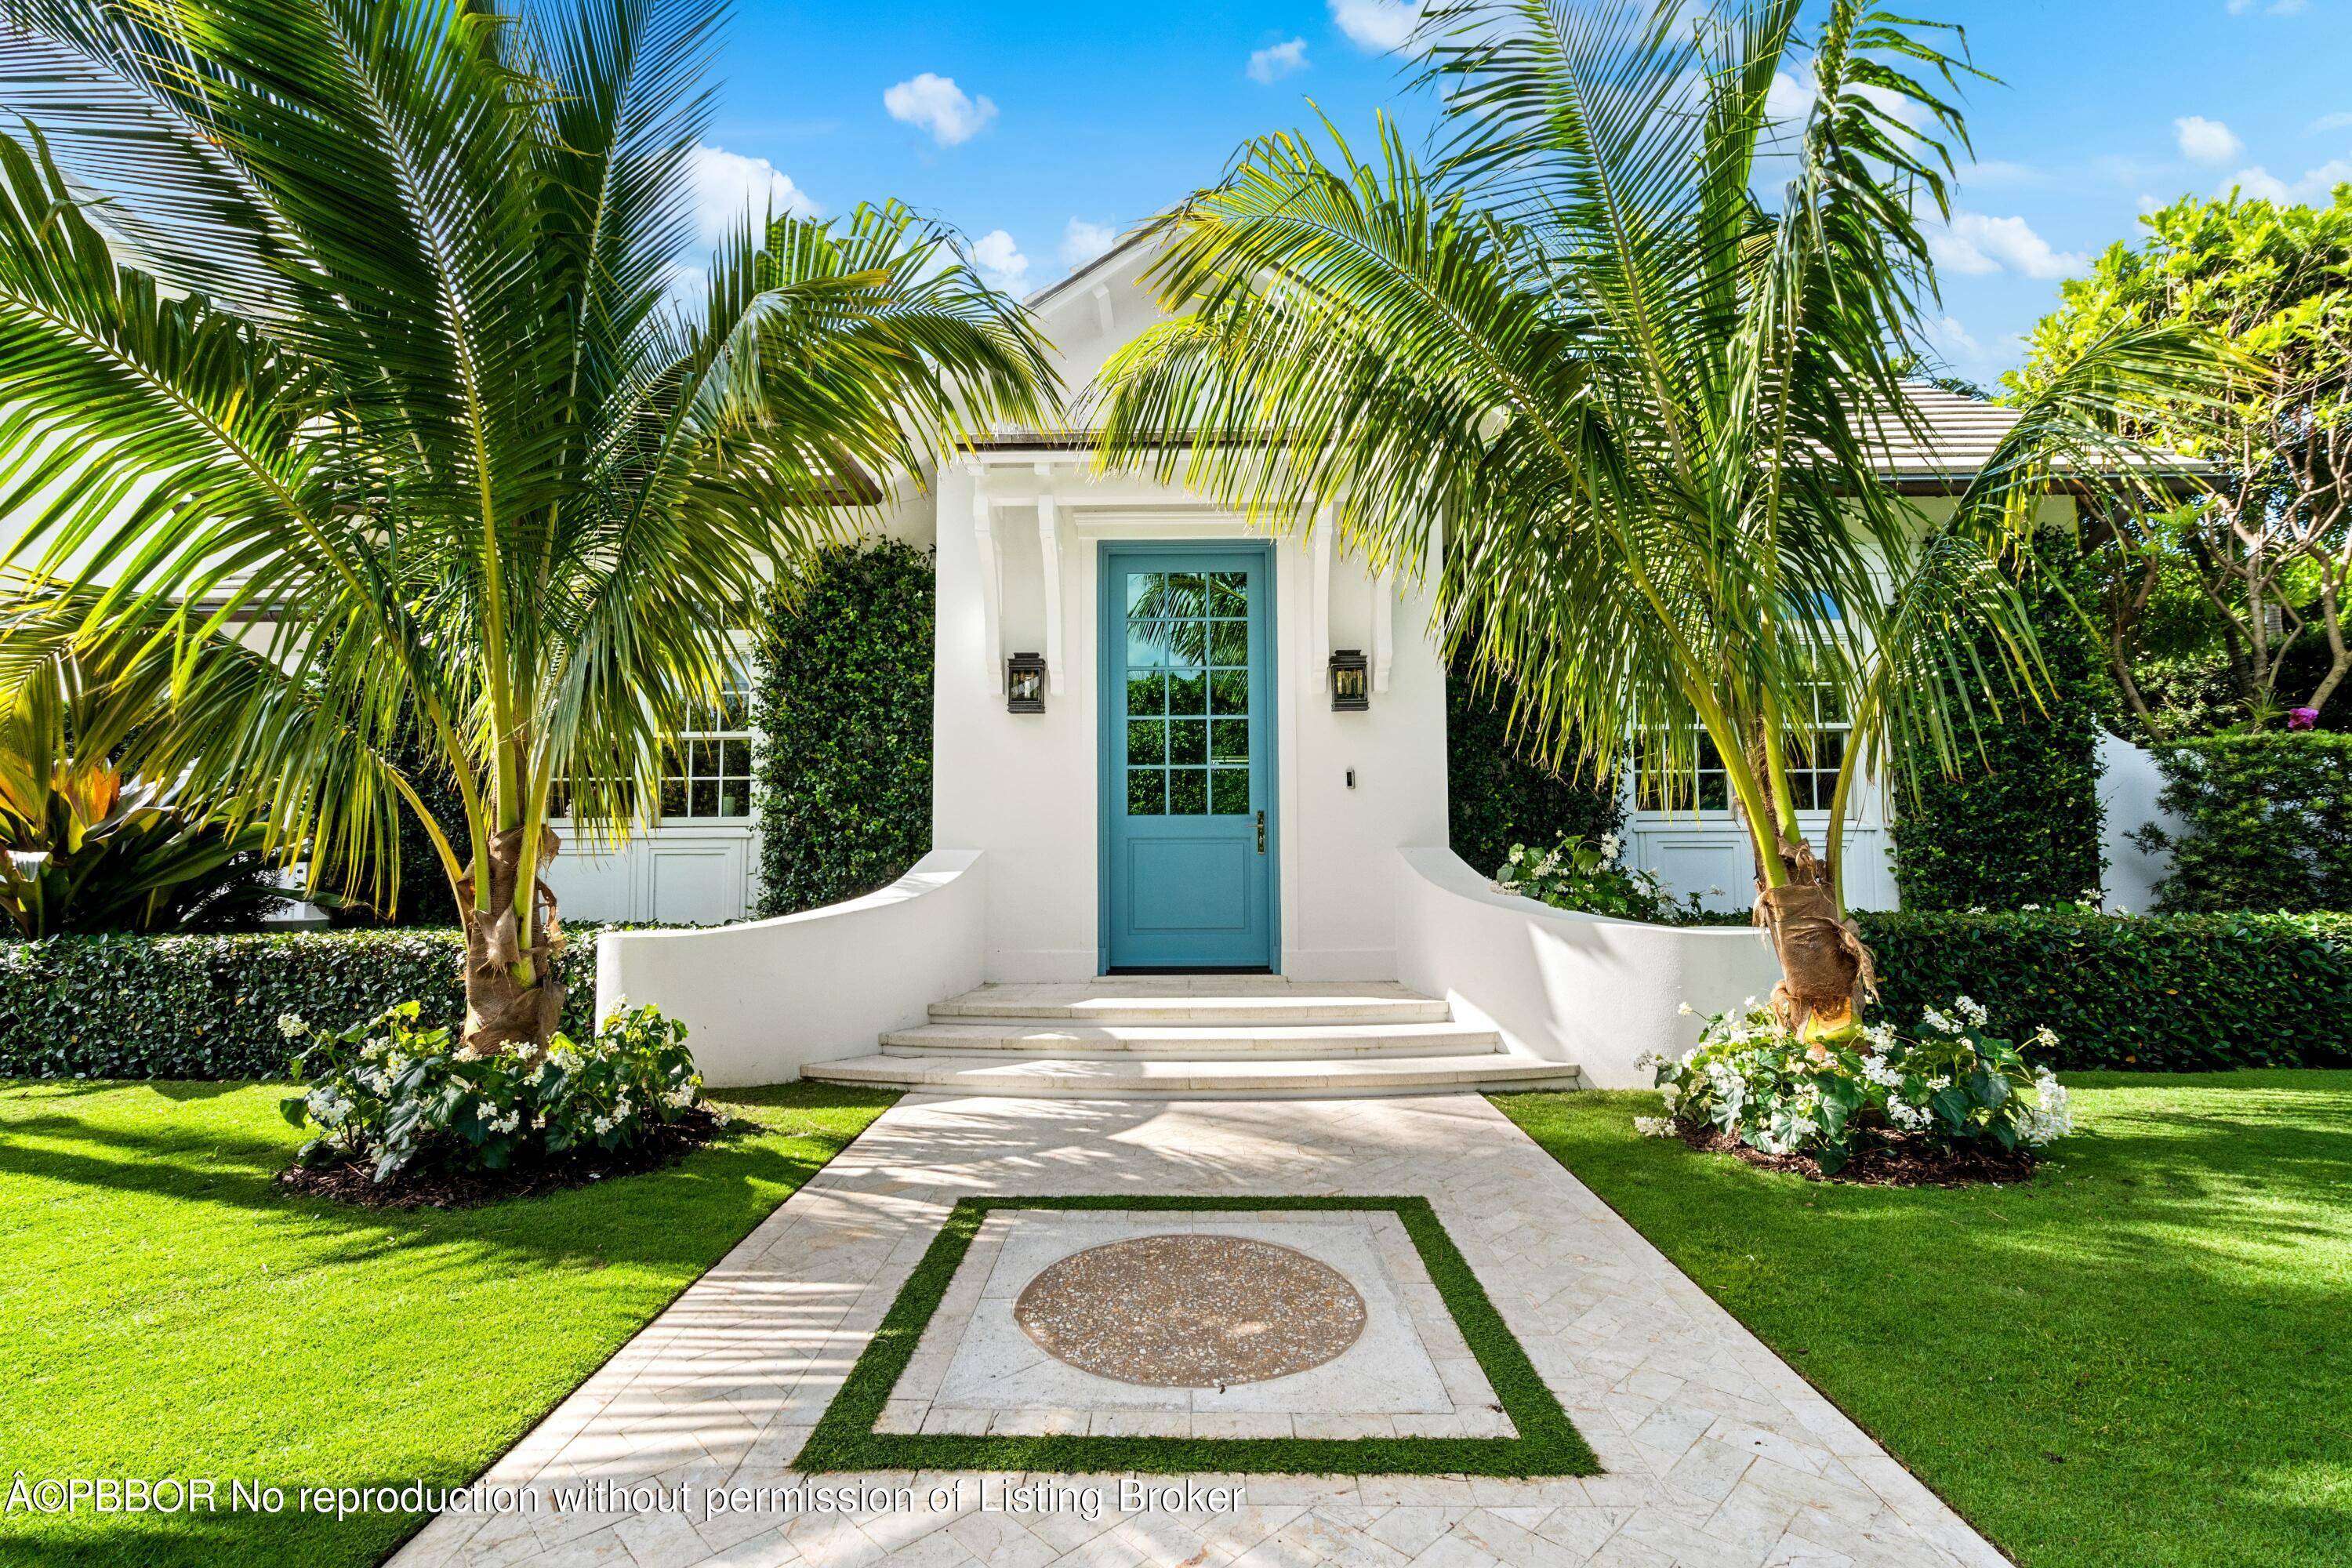 Welcome to 156 Seagate, located on a prime beach cabana street on the coveted North End of Palm Beach Island.